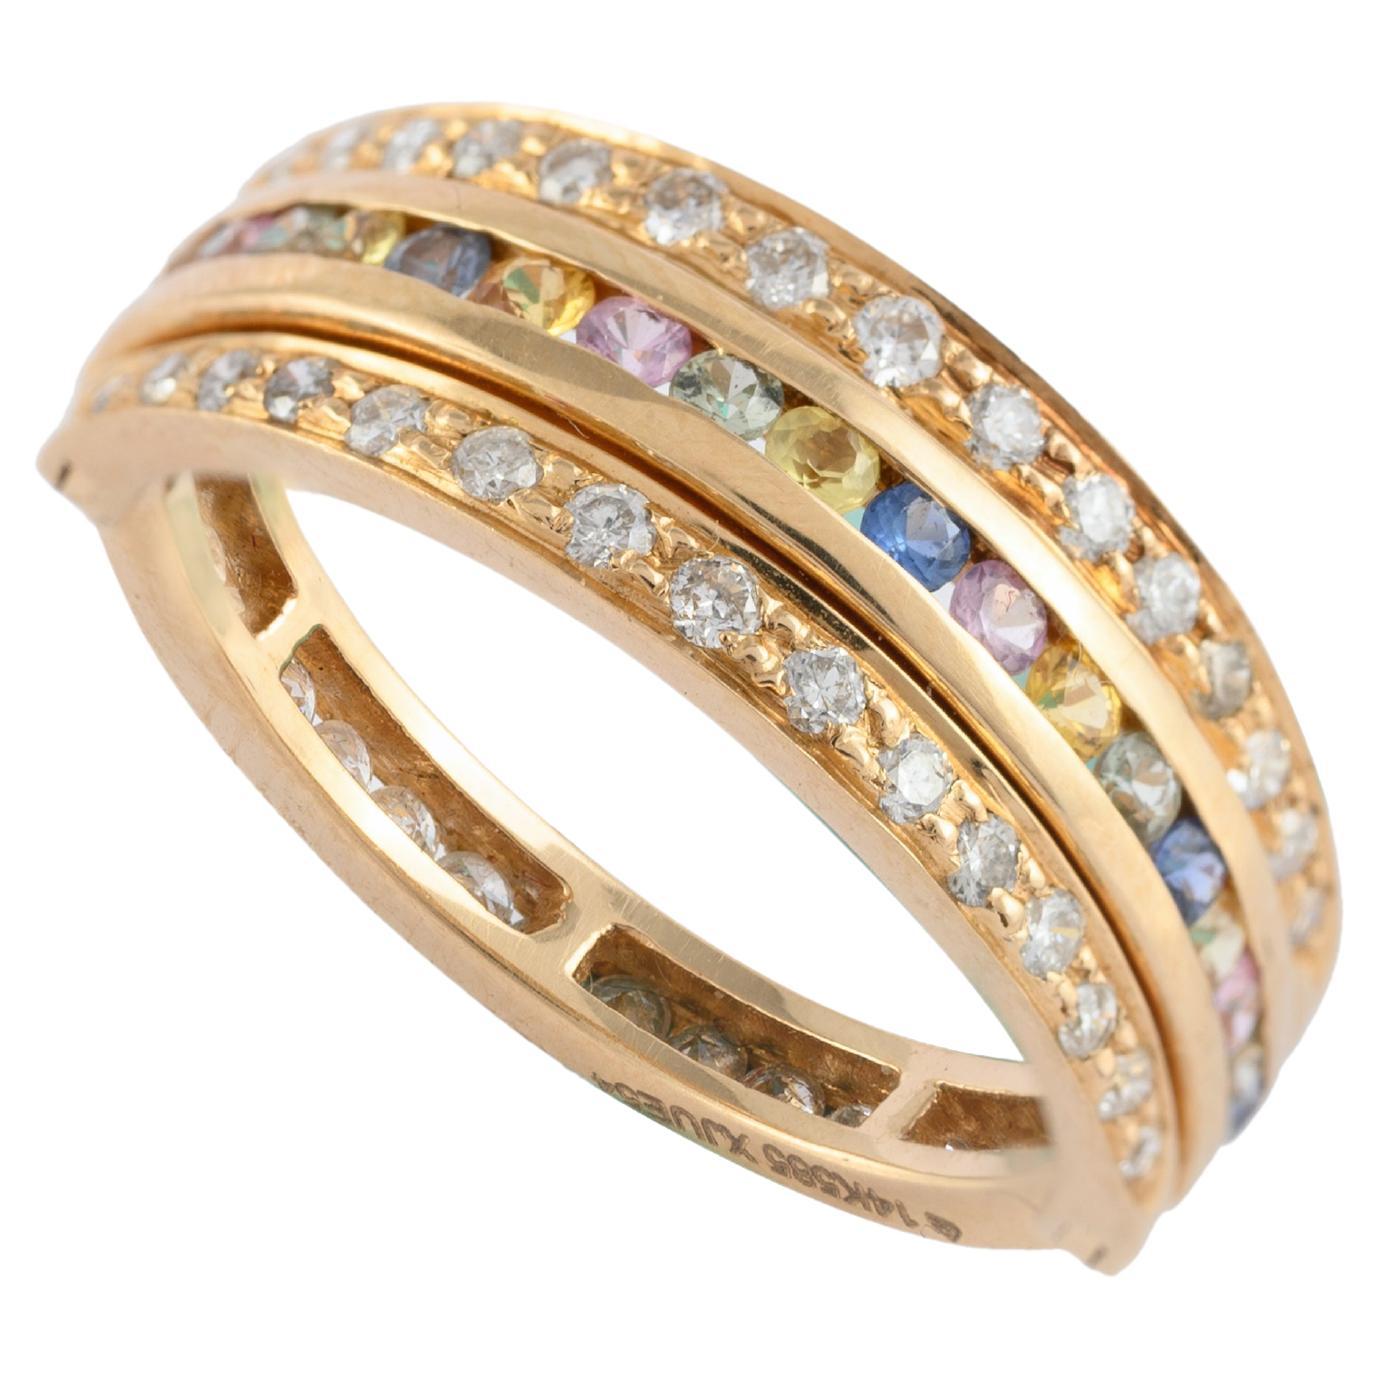 Unique Diamond and Multi Sapphire Spinner Ring in 14k Solid Yellow Gold